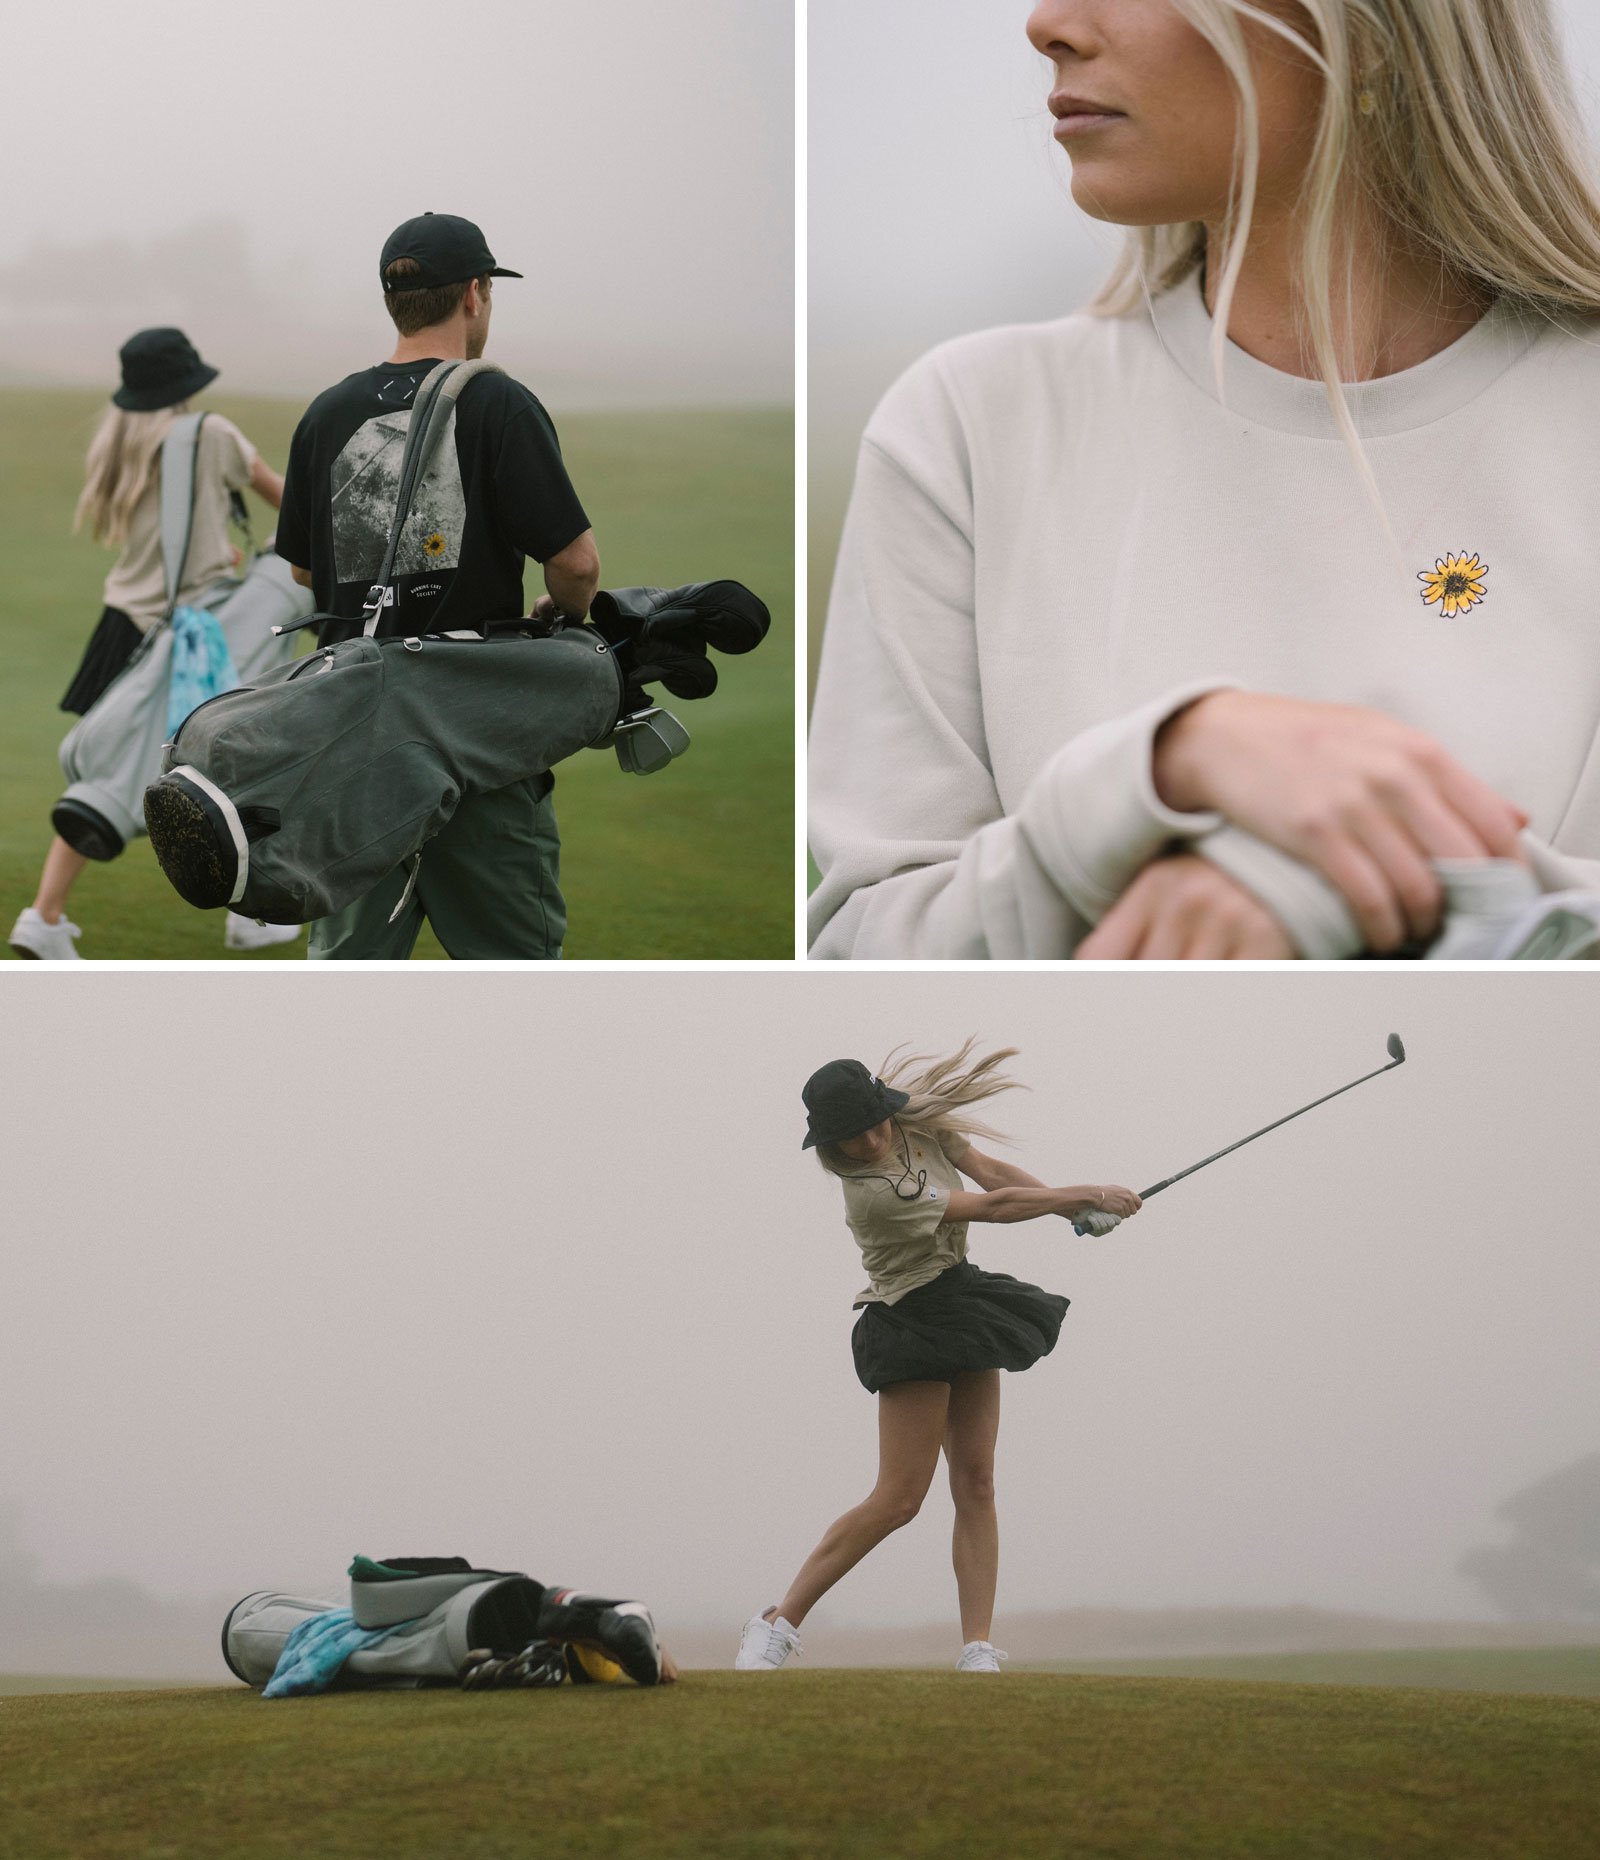 Burning Cart Society has partnered with Adidas for a new Sustainable Golf Collection Celebrating Nature